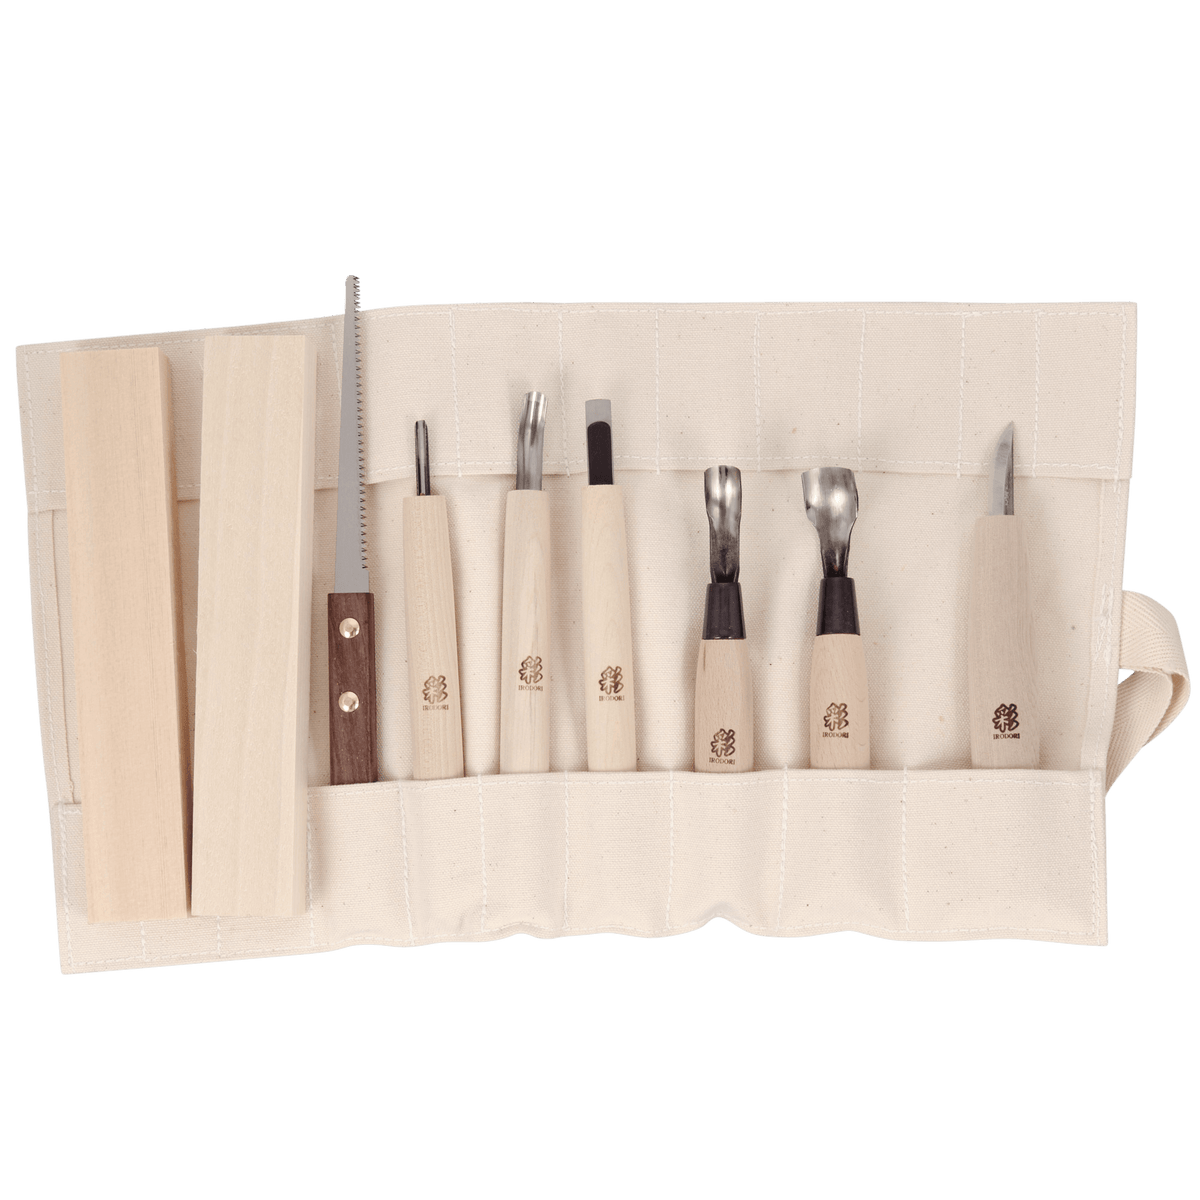 Our store has a great selection of Comprehensive Spoon Carving Kit  Michihamono